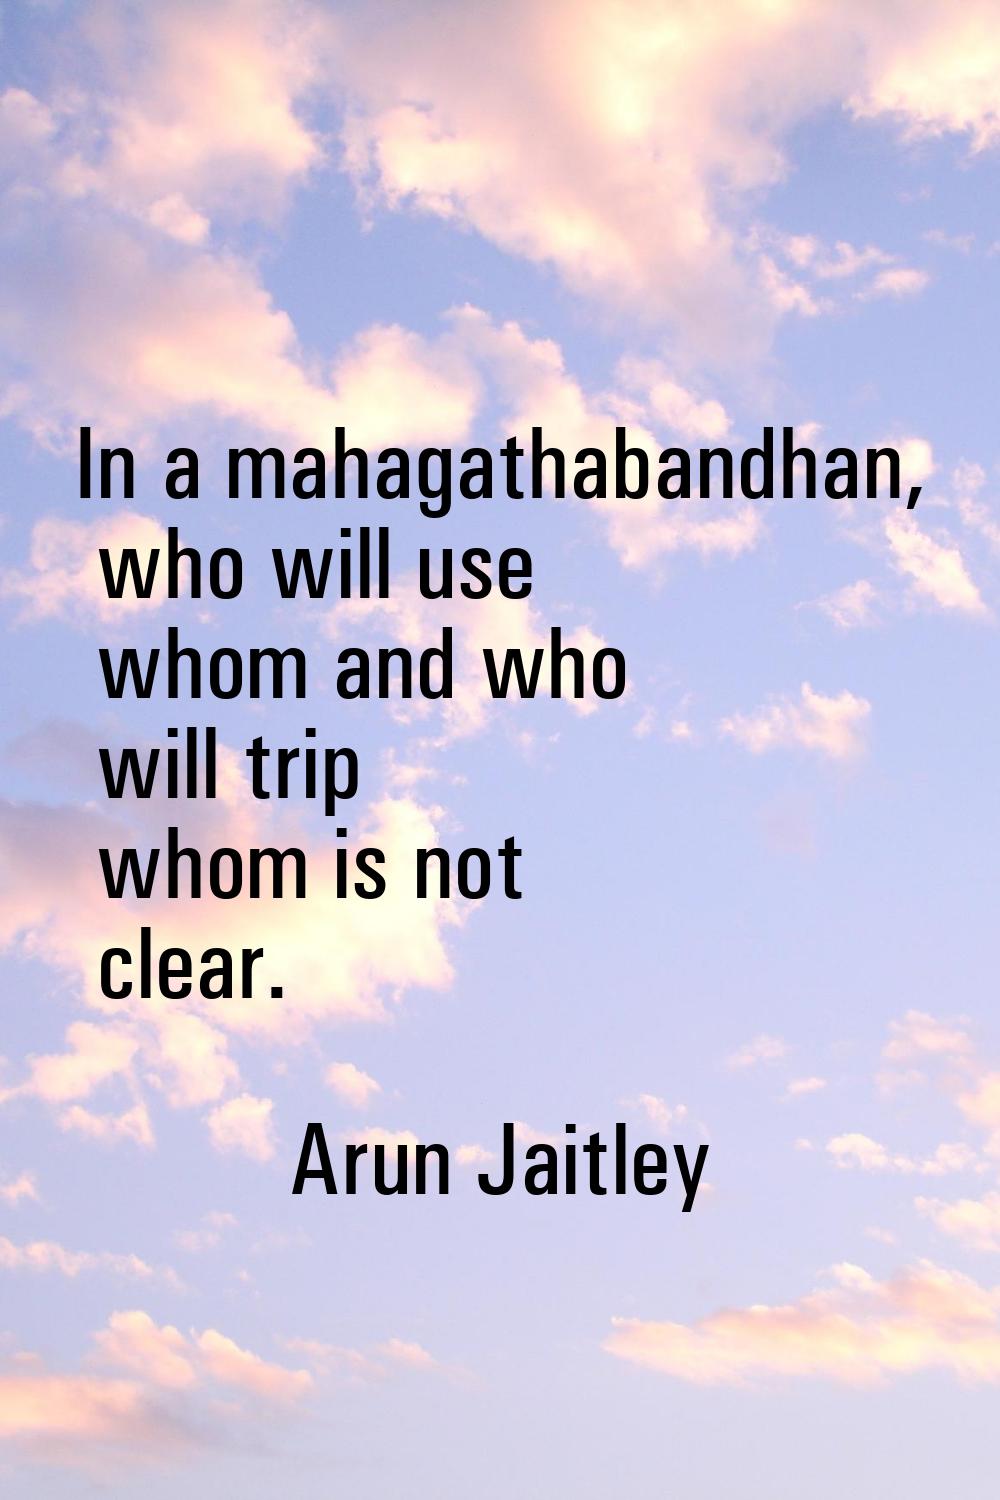 In a mahagathabandhan, who will use whom and who will trip whom is not clear.